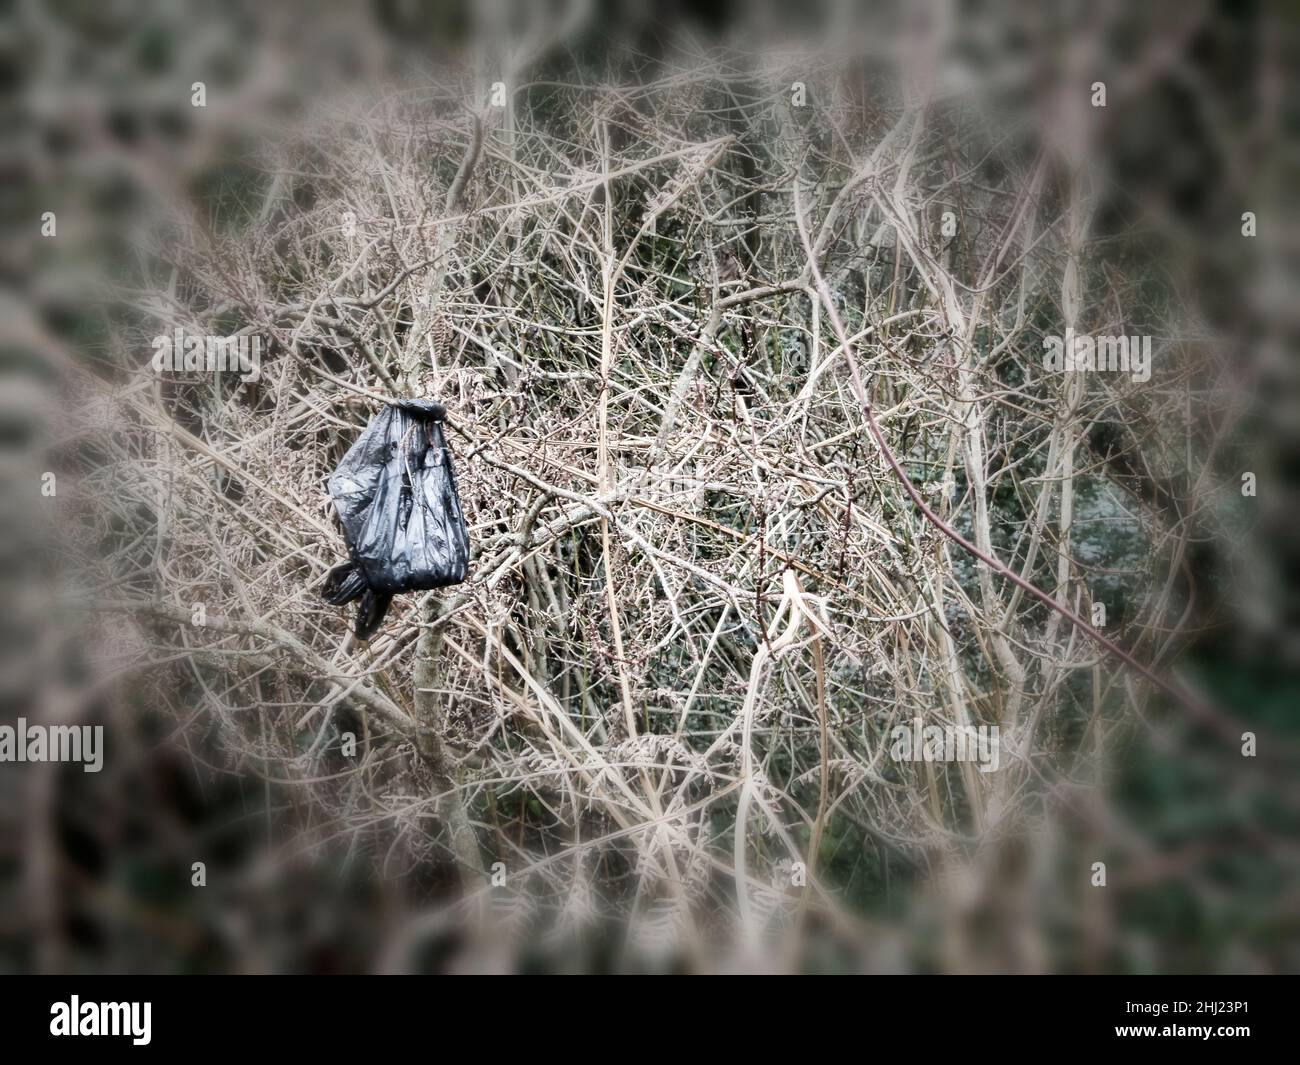 Found still-life of inconsiderate dog owners hanging poo bags from Hedgerow plants Stock Photo